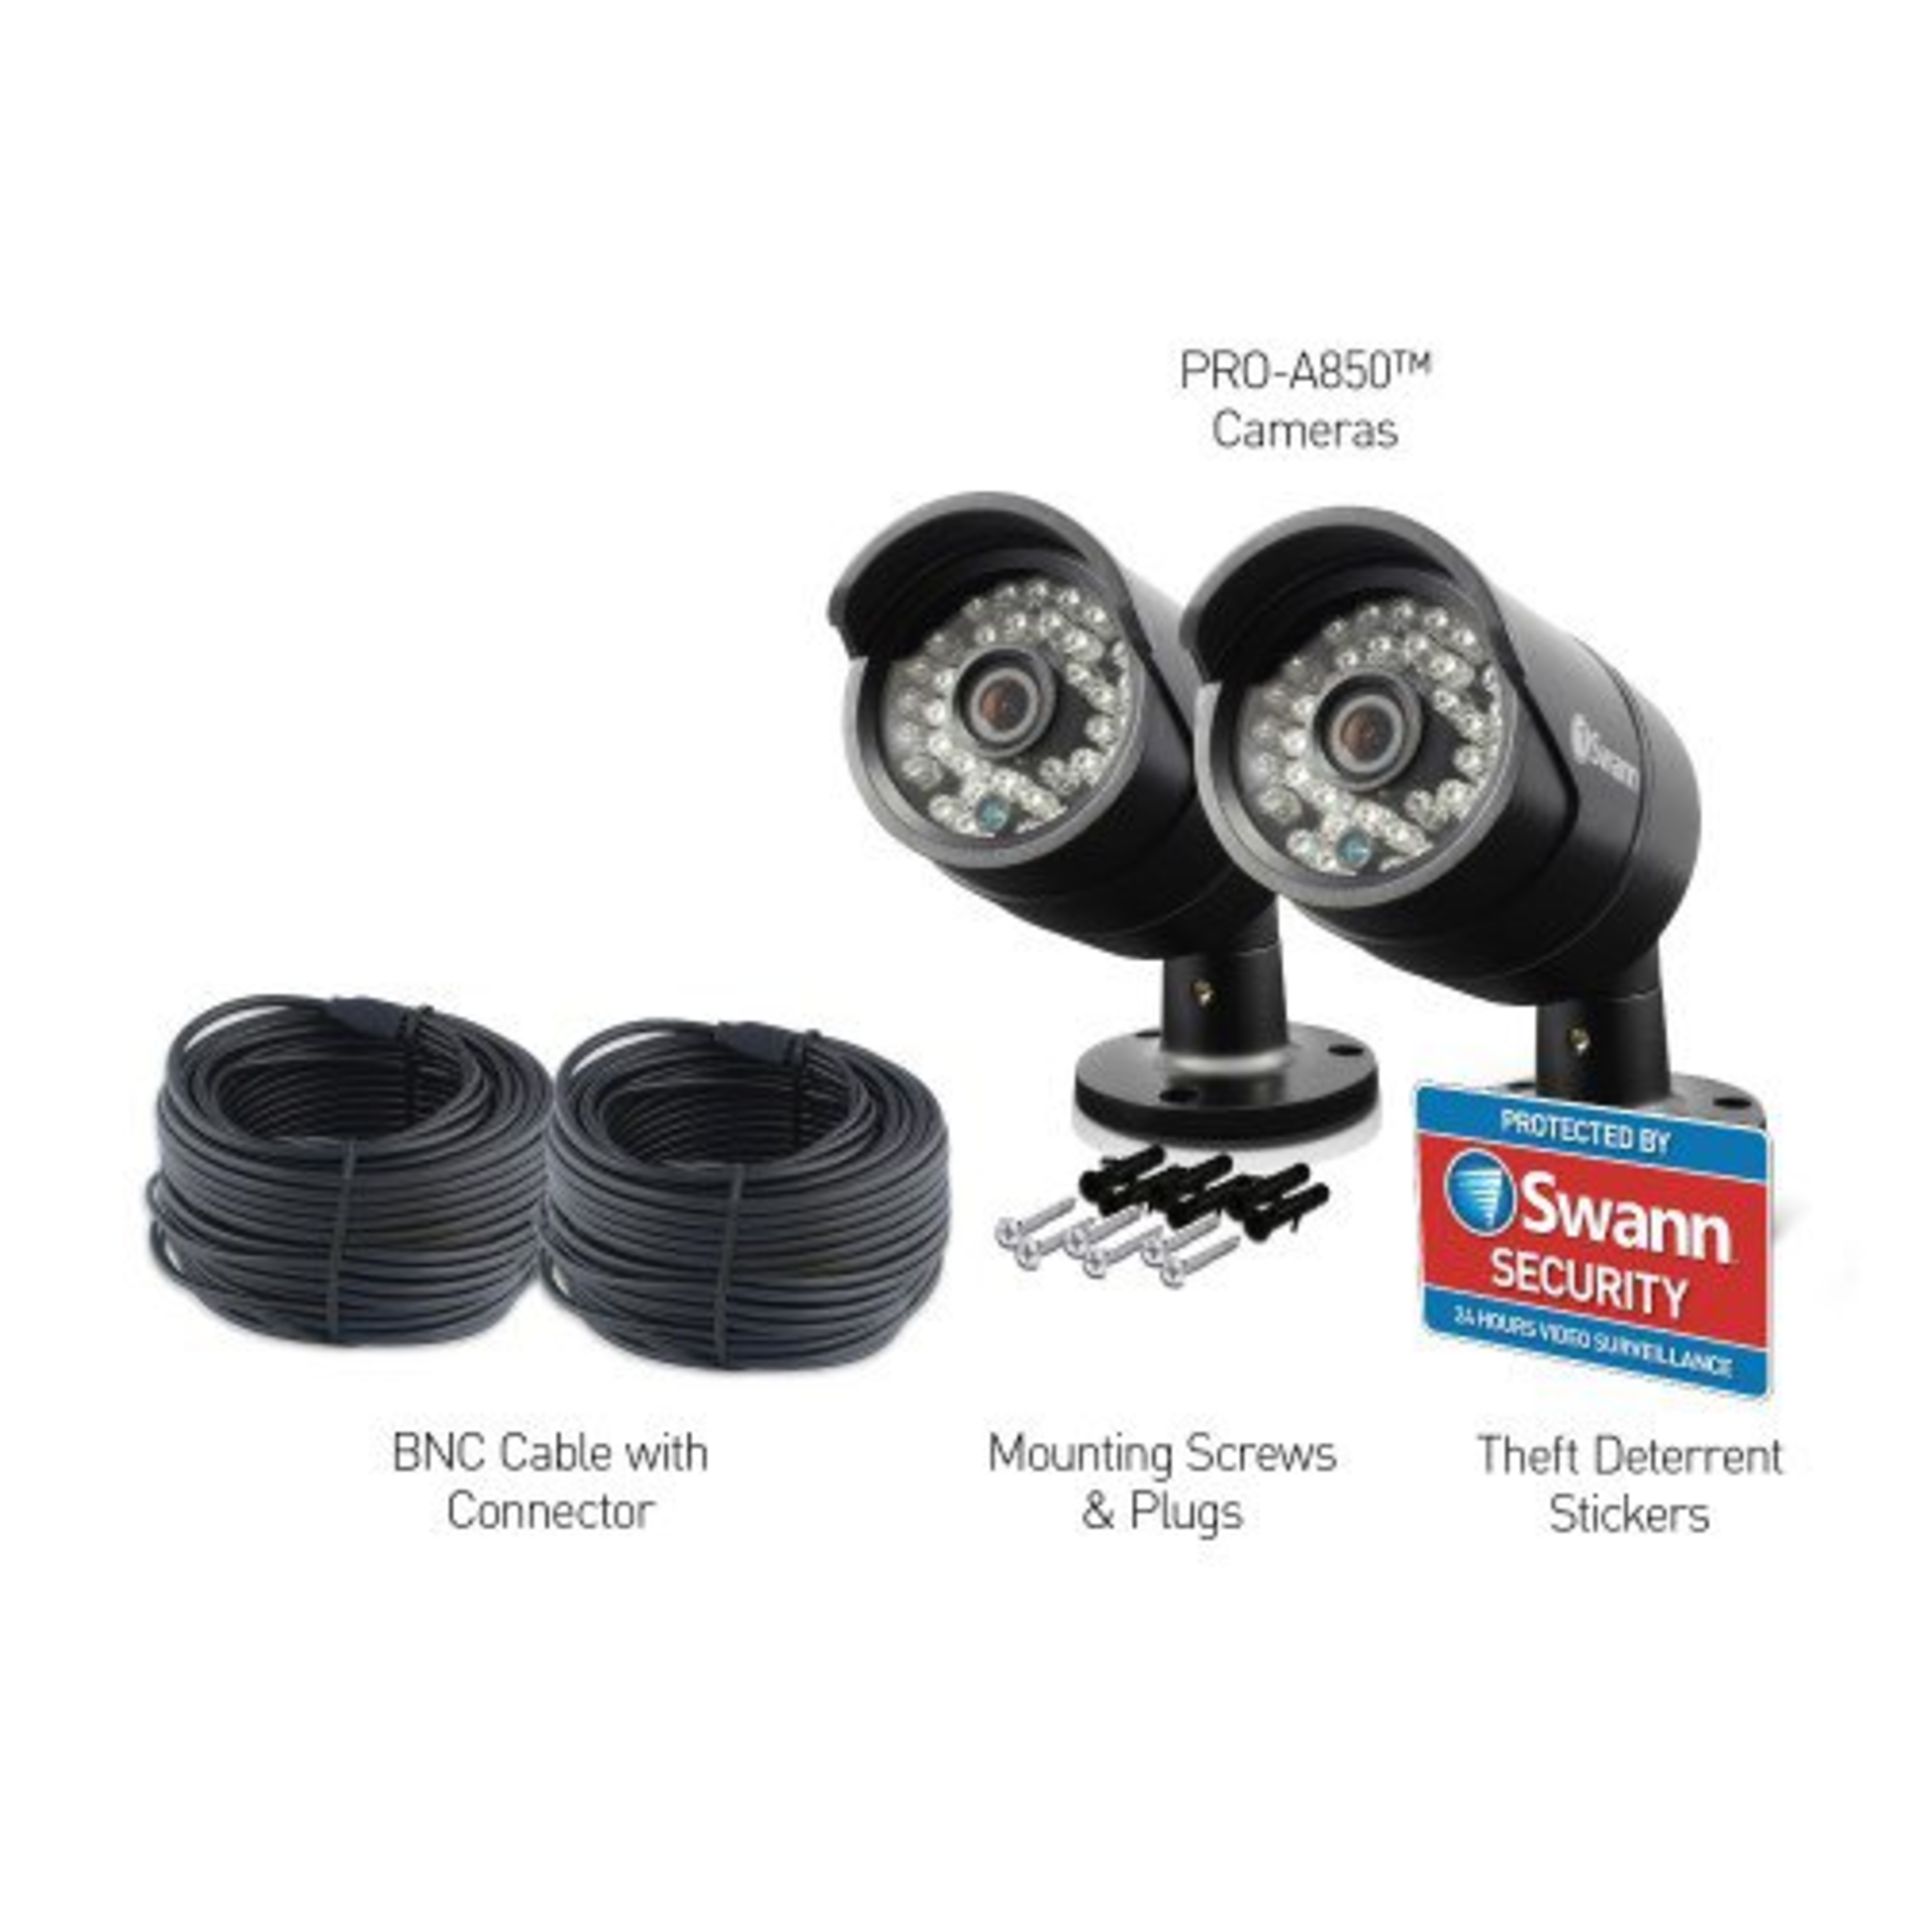 V Grade A Swann H850 PK2 720p Security Camera - 30 Meter Night Vision - Weather Proof X 2 YOUR BID